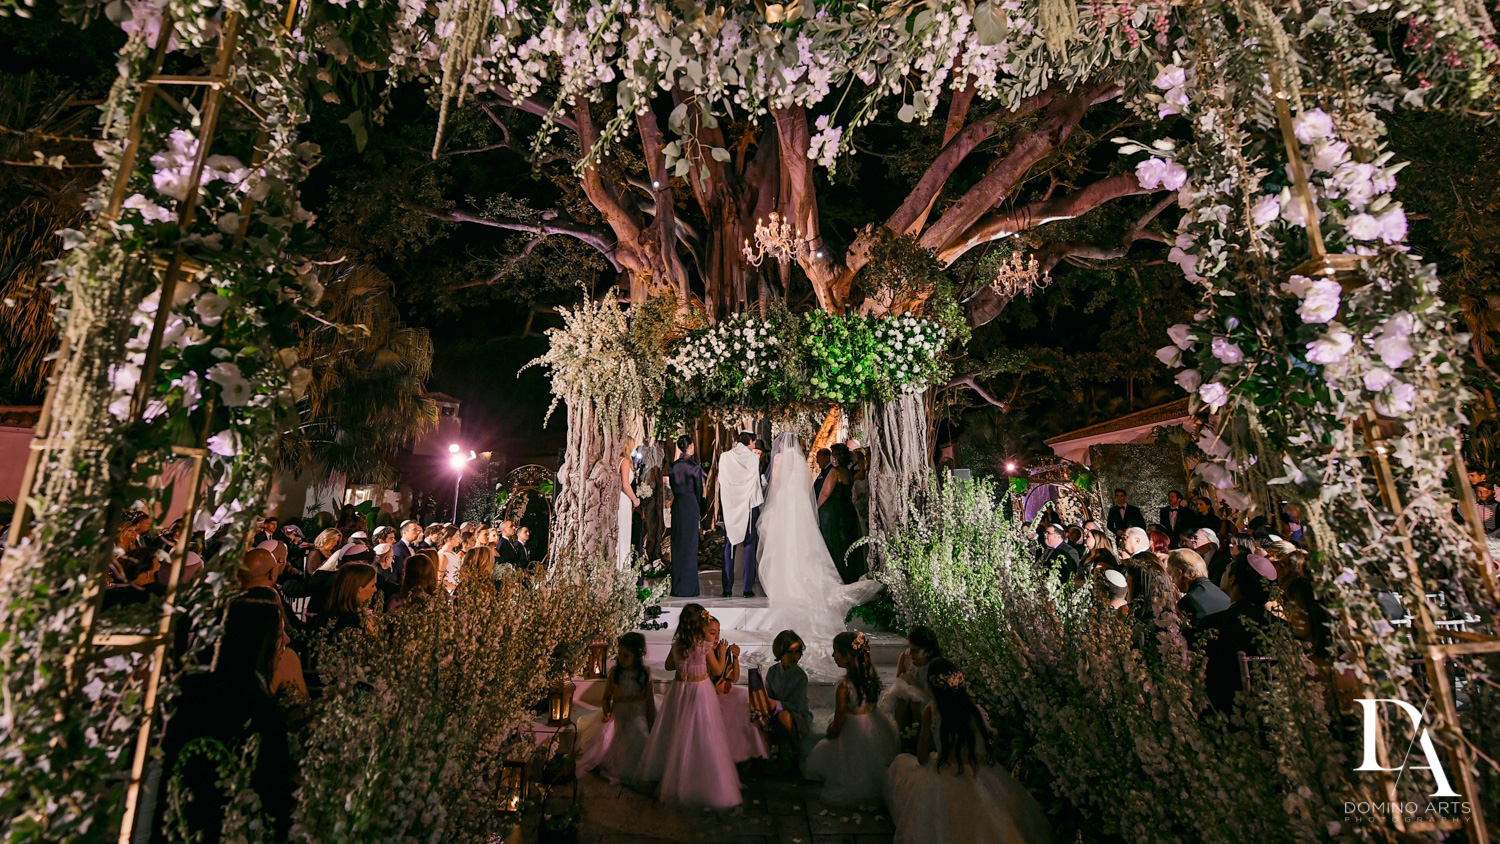 elaborate ceremony at Luxurious Destination Wedding at Fisher Island Miami by Domino Arts Photography